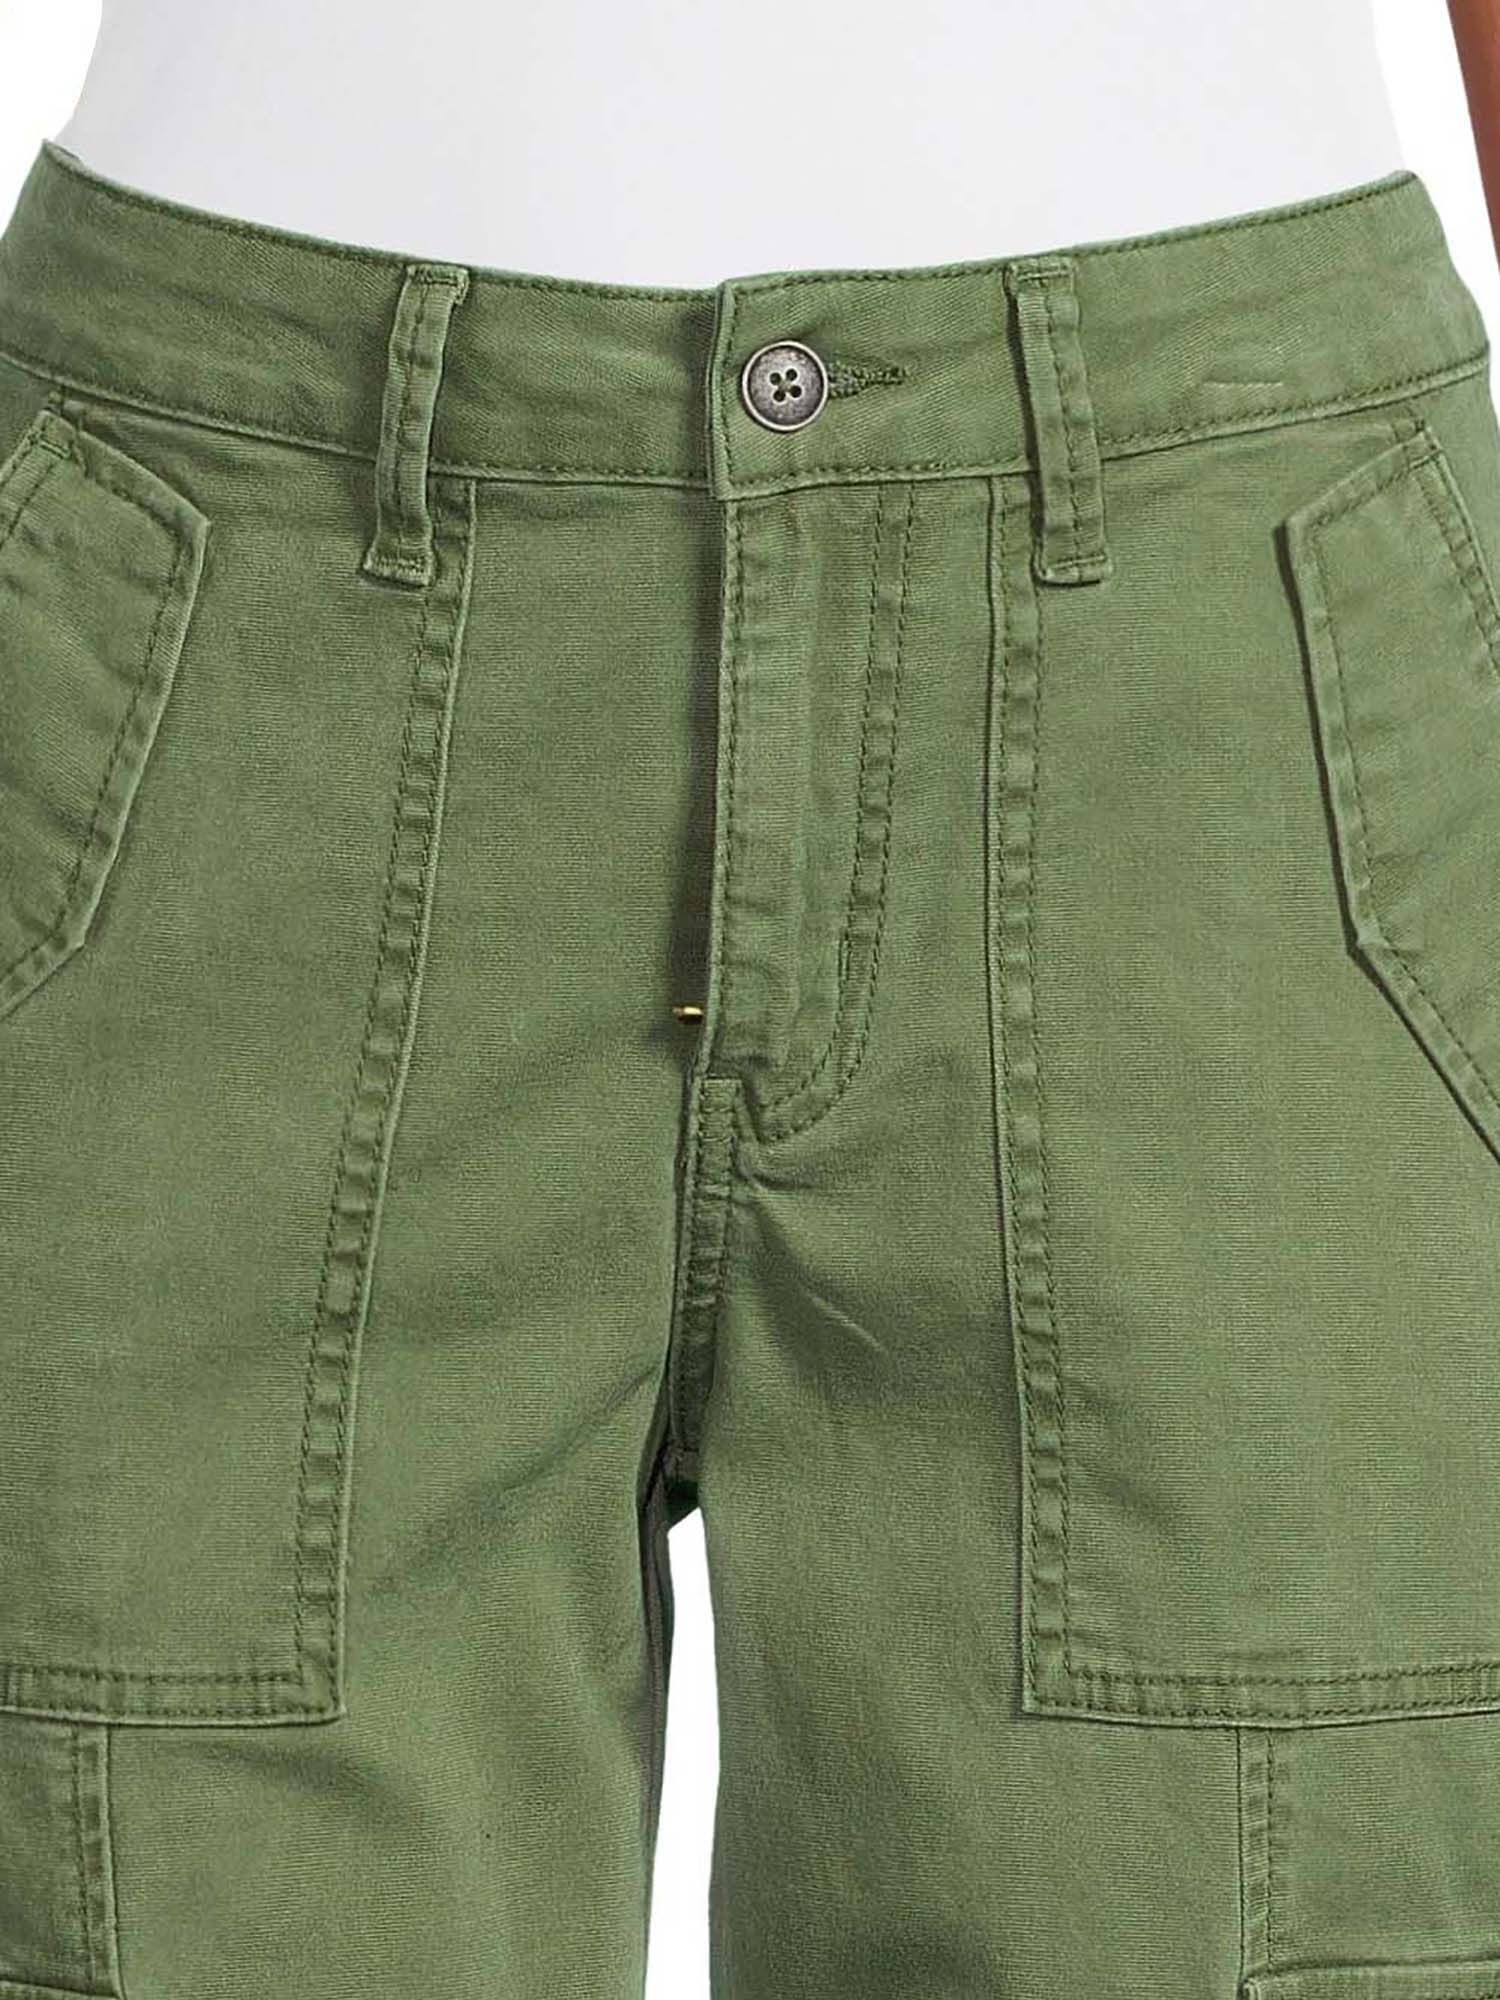 Time and Tru Women's Cargo Pants - image 4 of 5